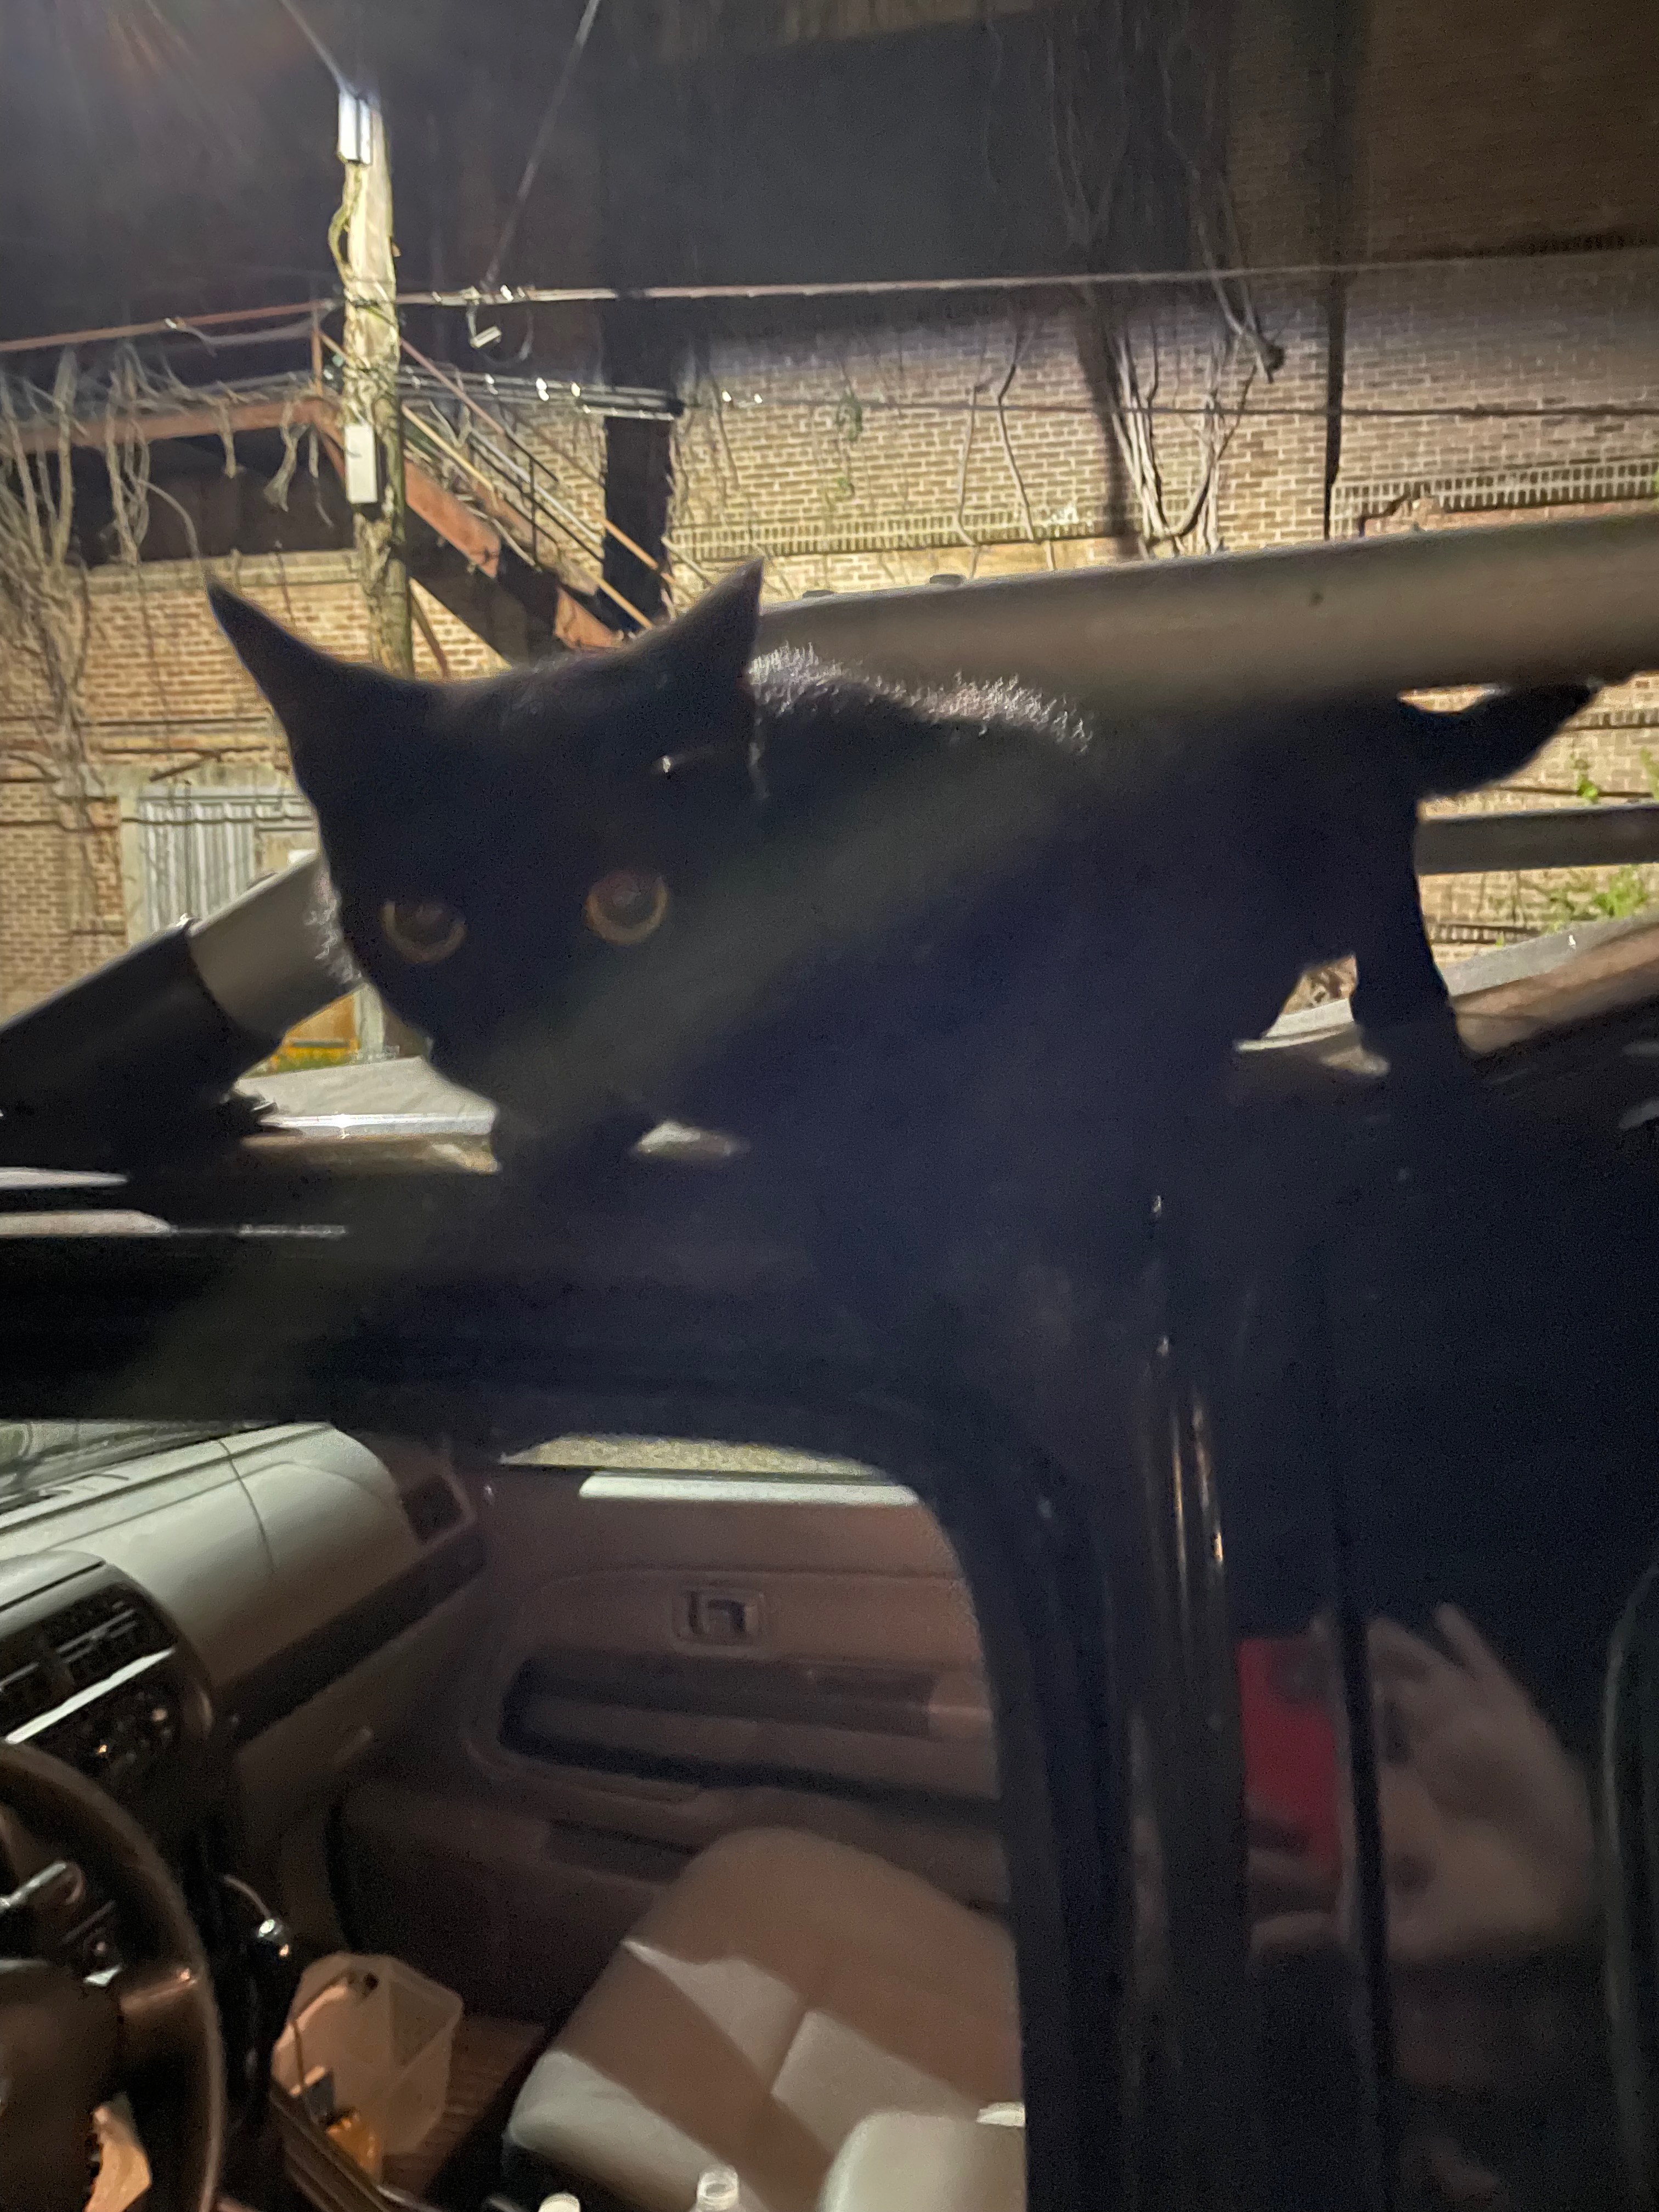 Shadow the black cat was camouflaged on the roof of my car.